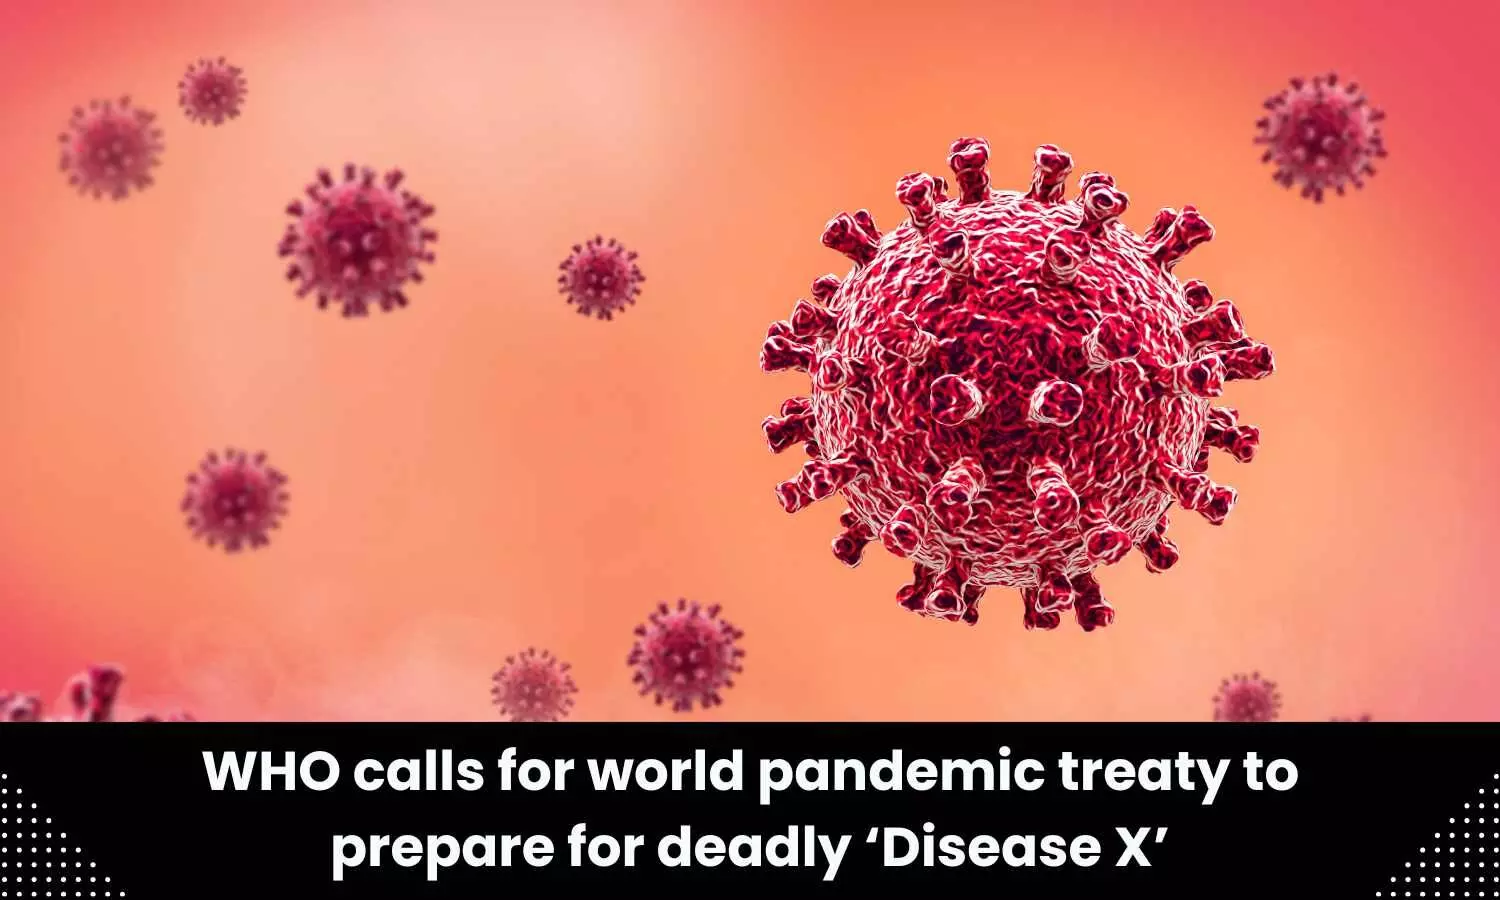 WHO calls for world pandemic treaty to prepare for Disease X